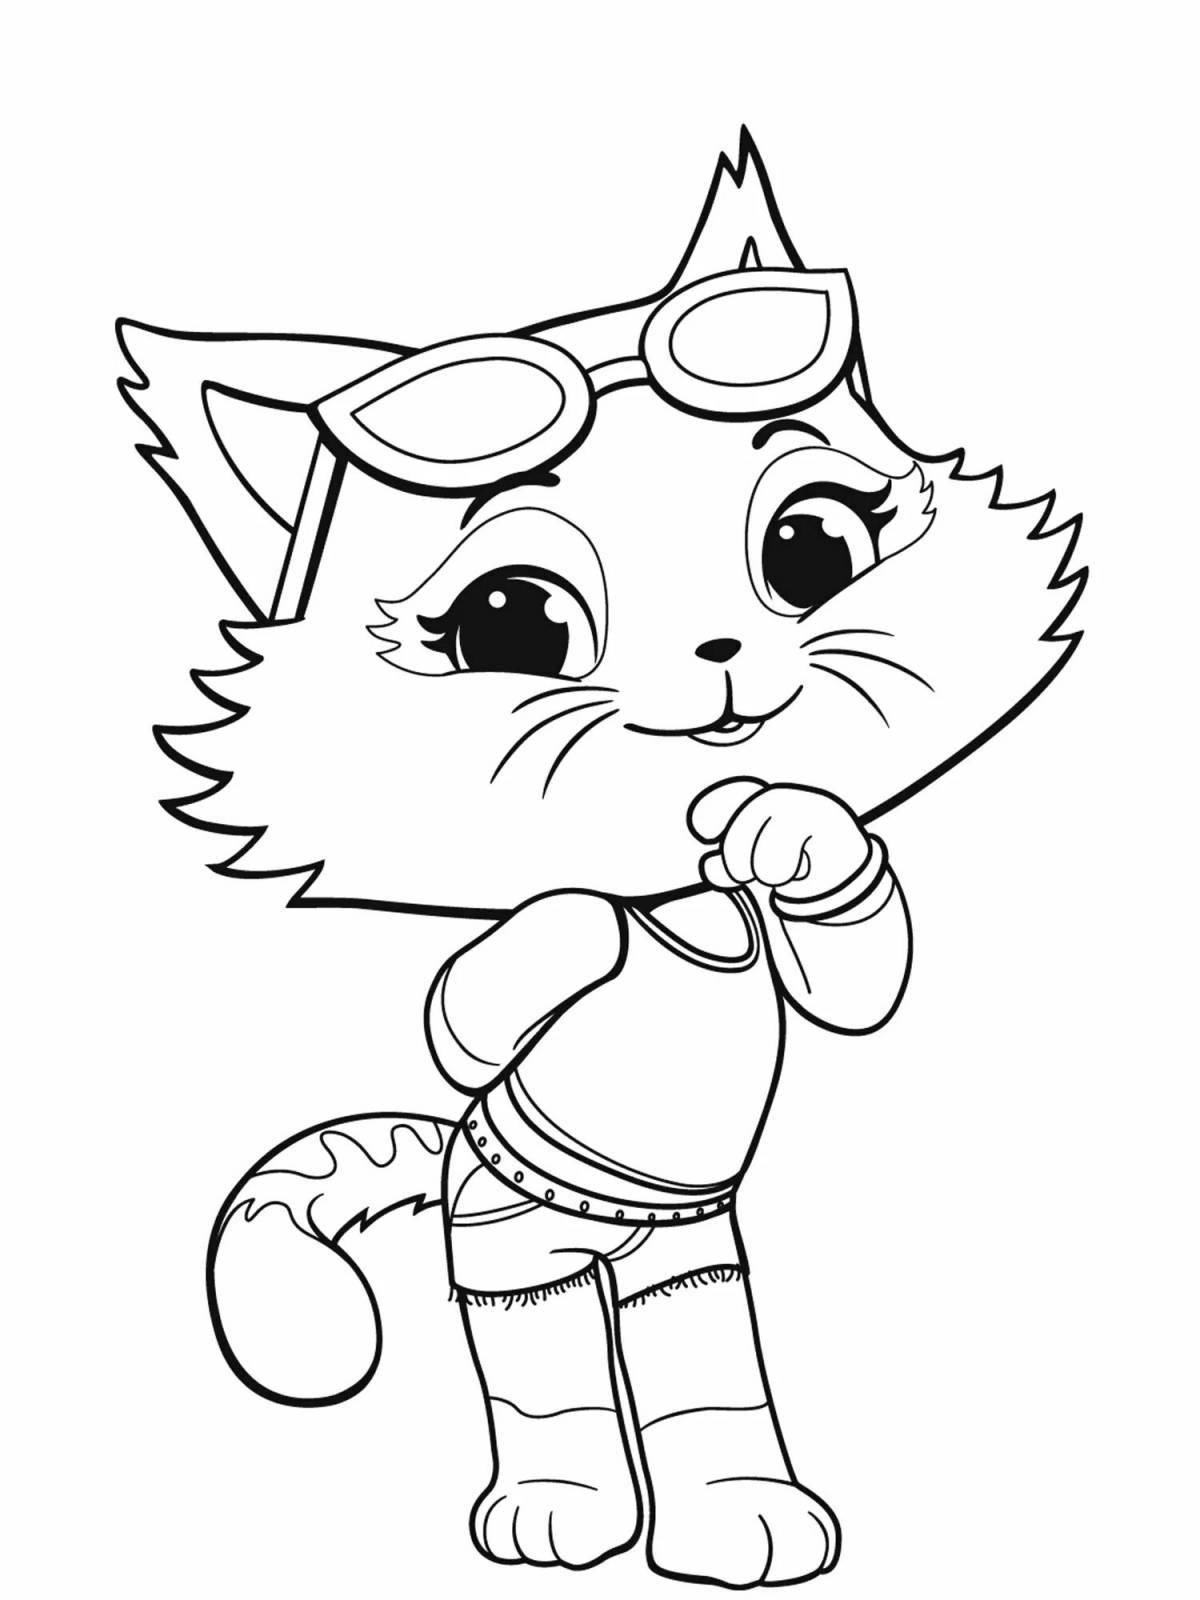 Meow animated coloring page